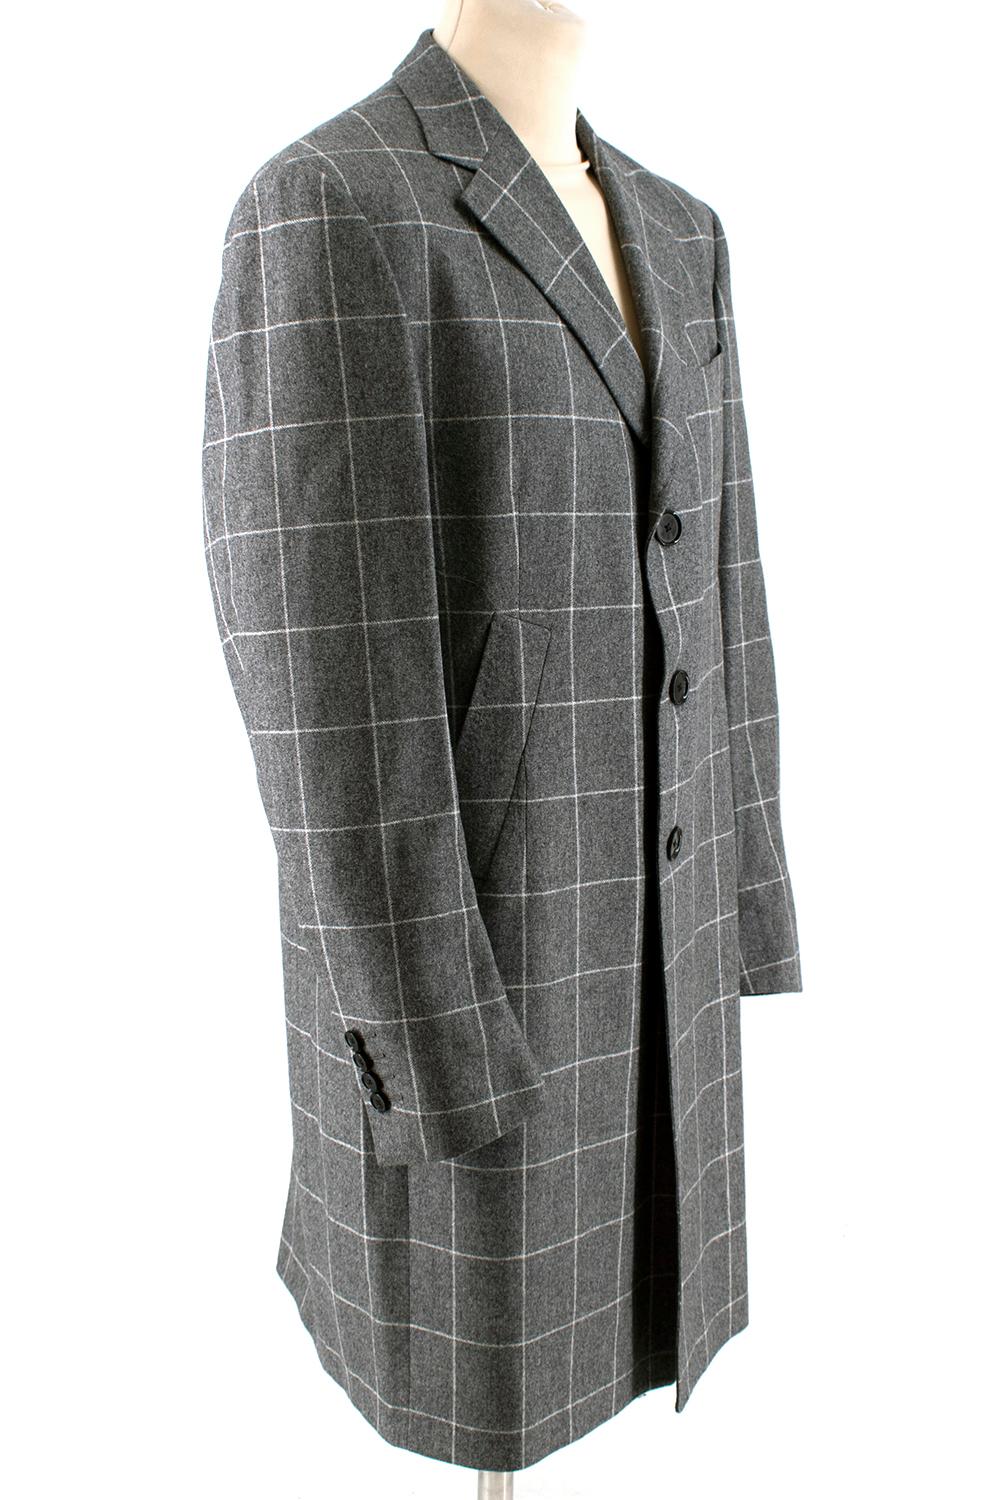 Hilditch & Key Grey Checkered Wool Coat

-Italian fabric (super 100's)
-Great smooth texture
-Classic cut 
-Light weight 
-2 functional outer pockets
-4 funcional inner pockets 
-Fully lined 

Materials:

Main: 100% wool Super 100's
Lining- 100%